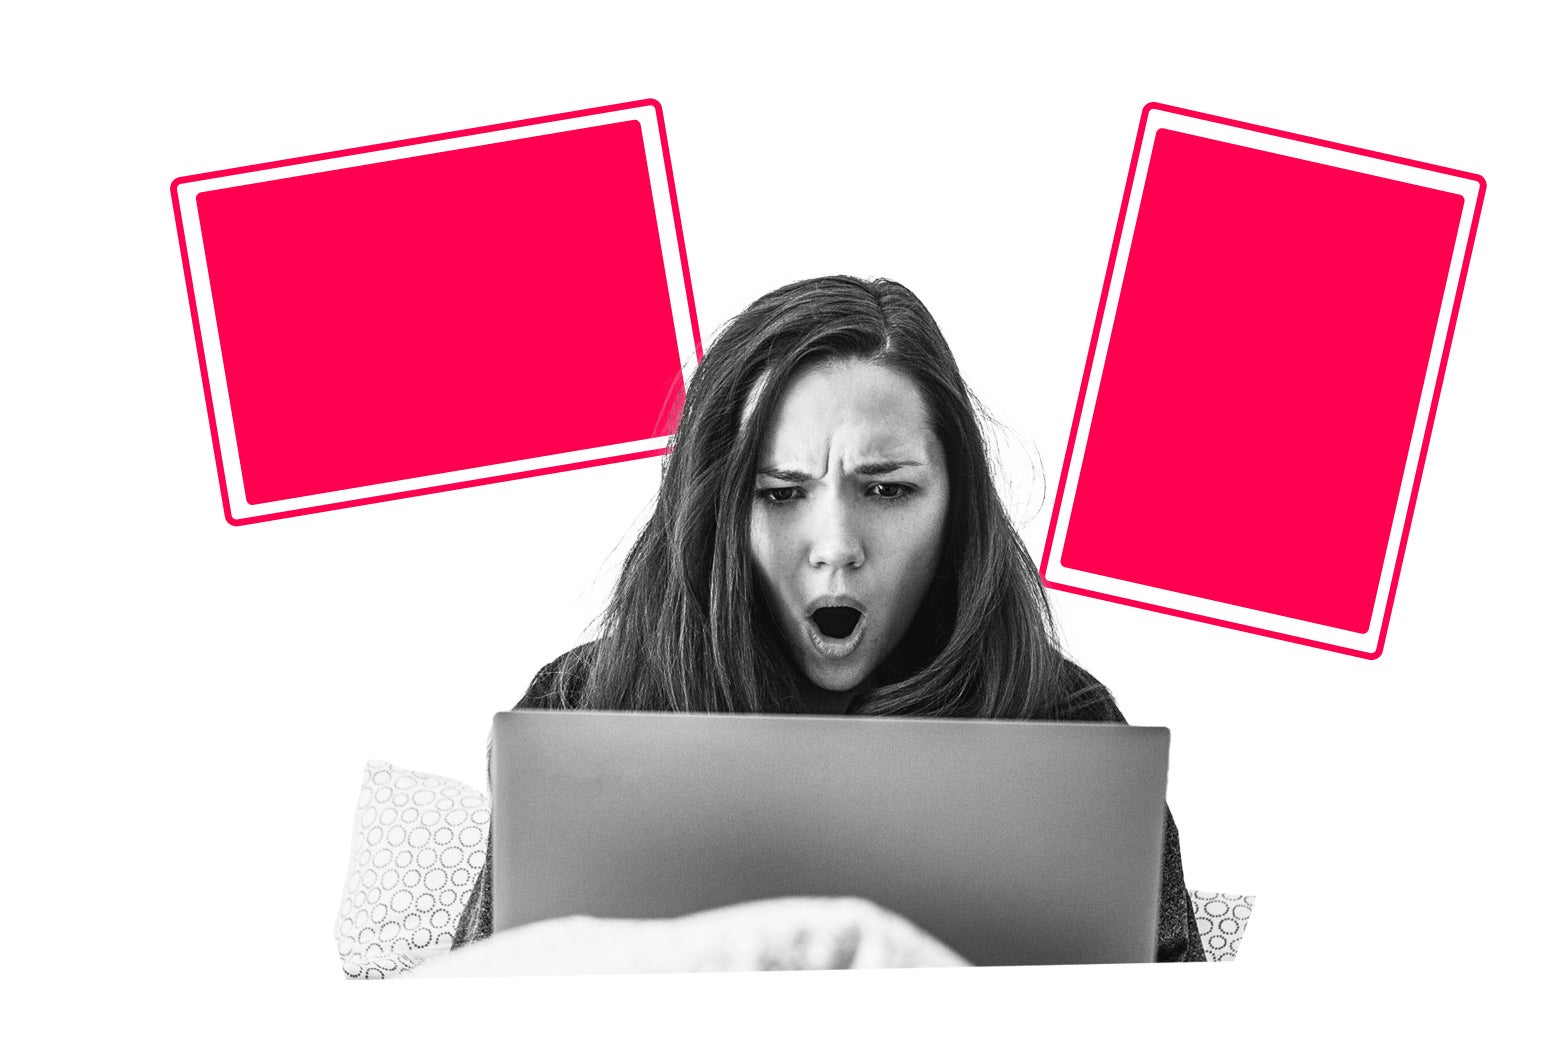 Woman with her mouth open in shock and anger looking at a laptop.